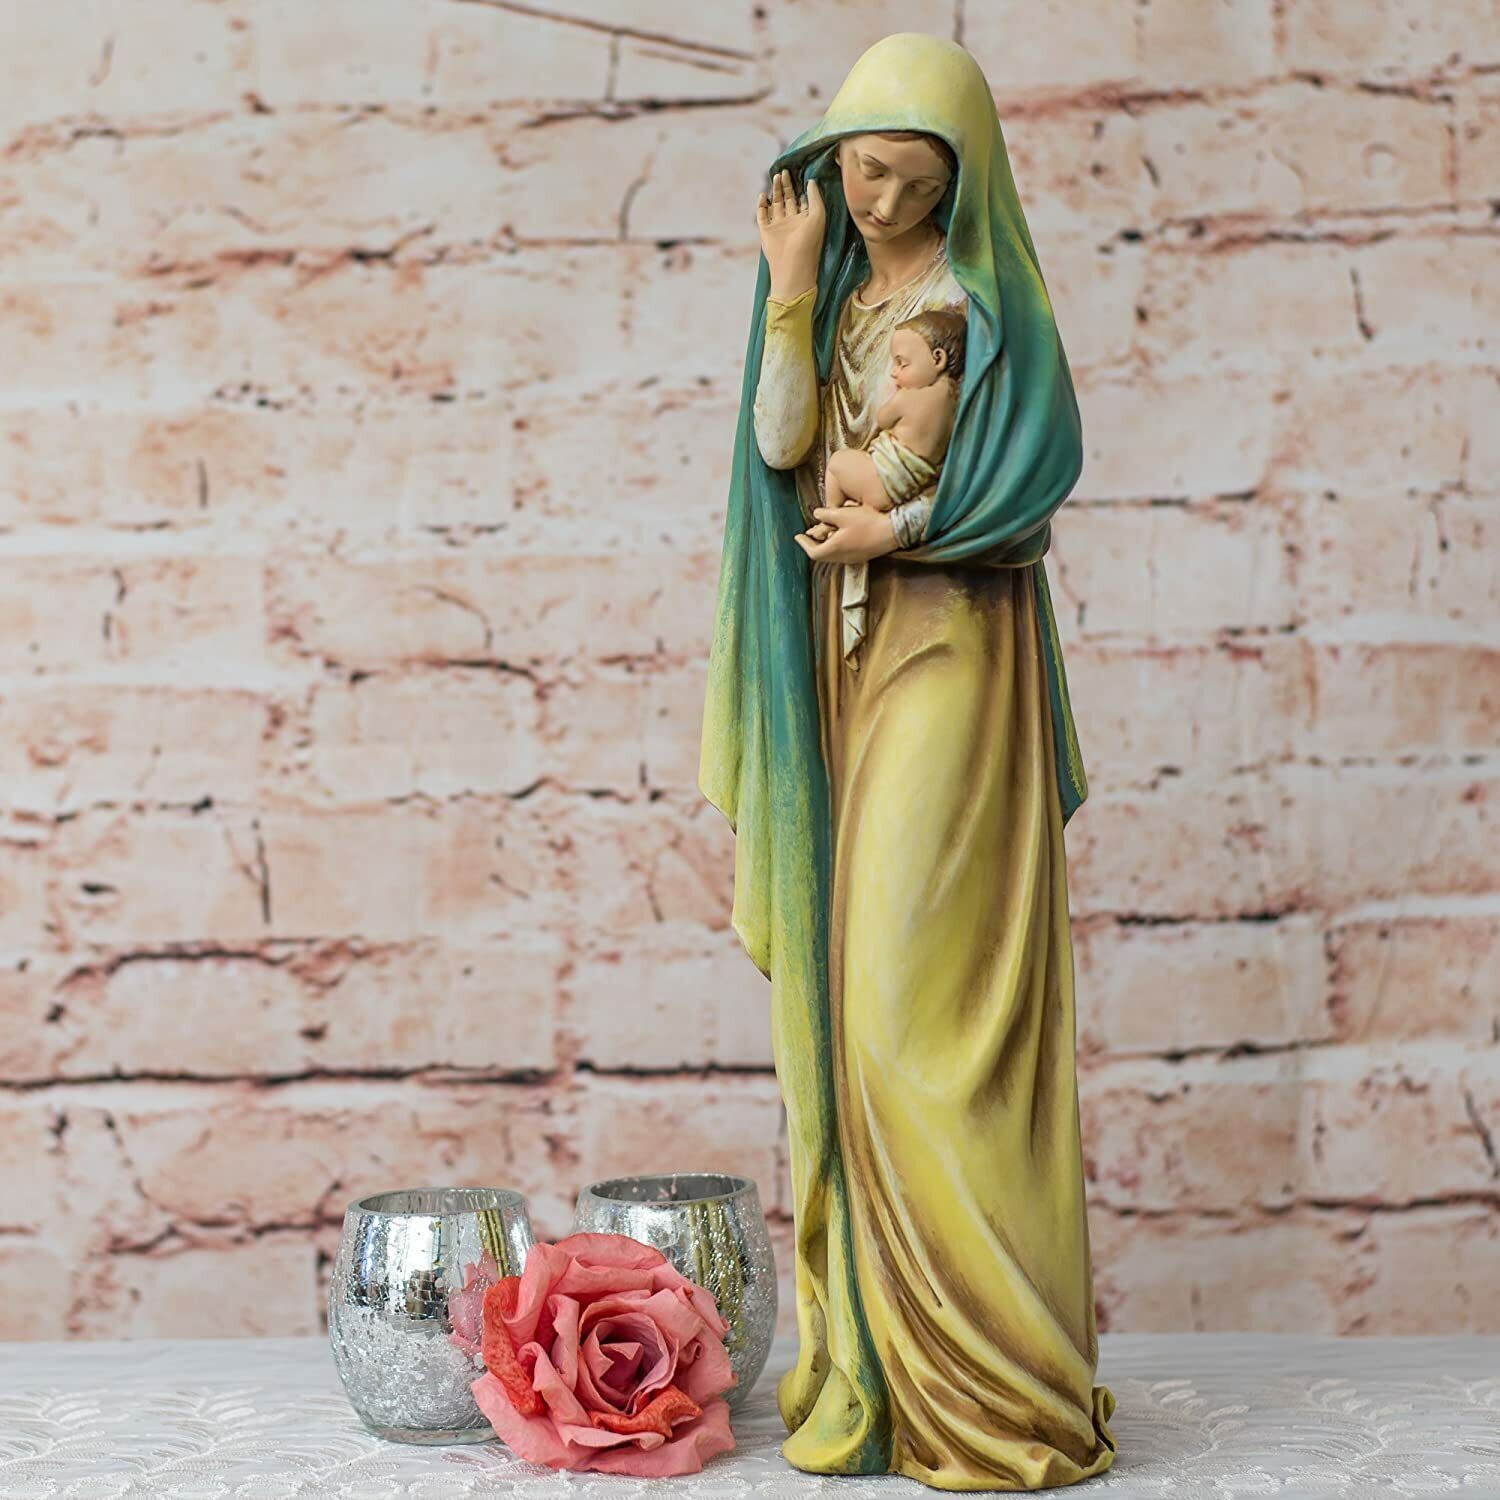 Madonna & Child Jesus Our Lady Virgin Mary Statue Religious Figurine Home Decor